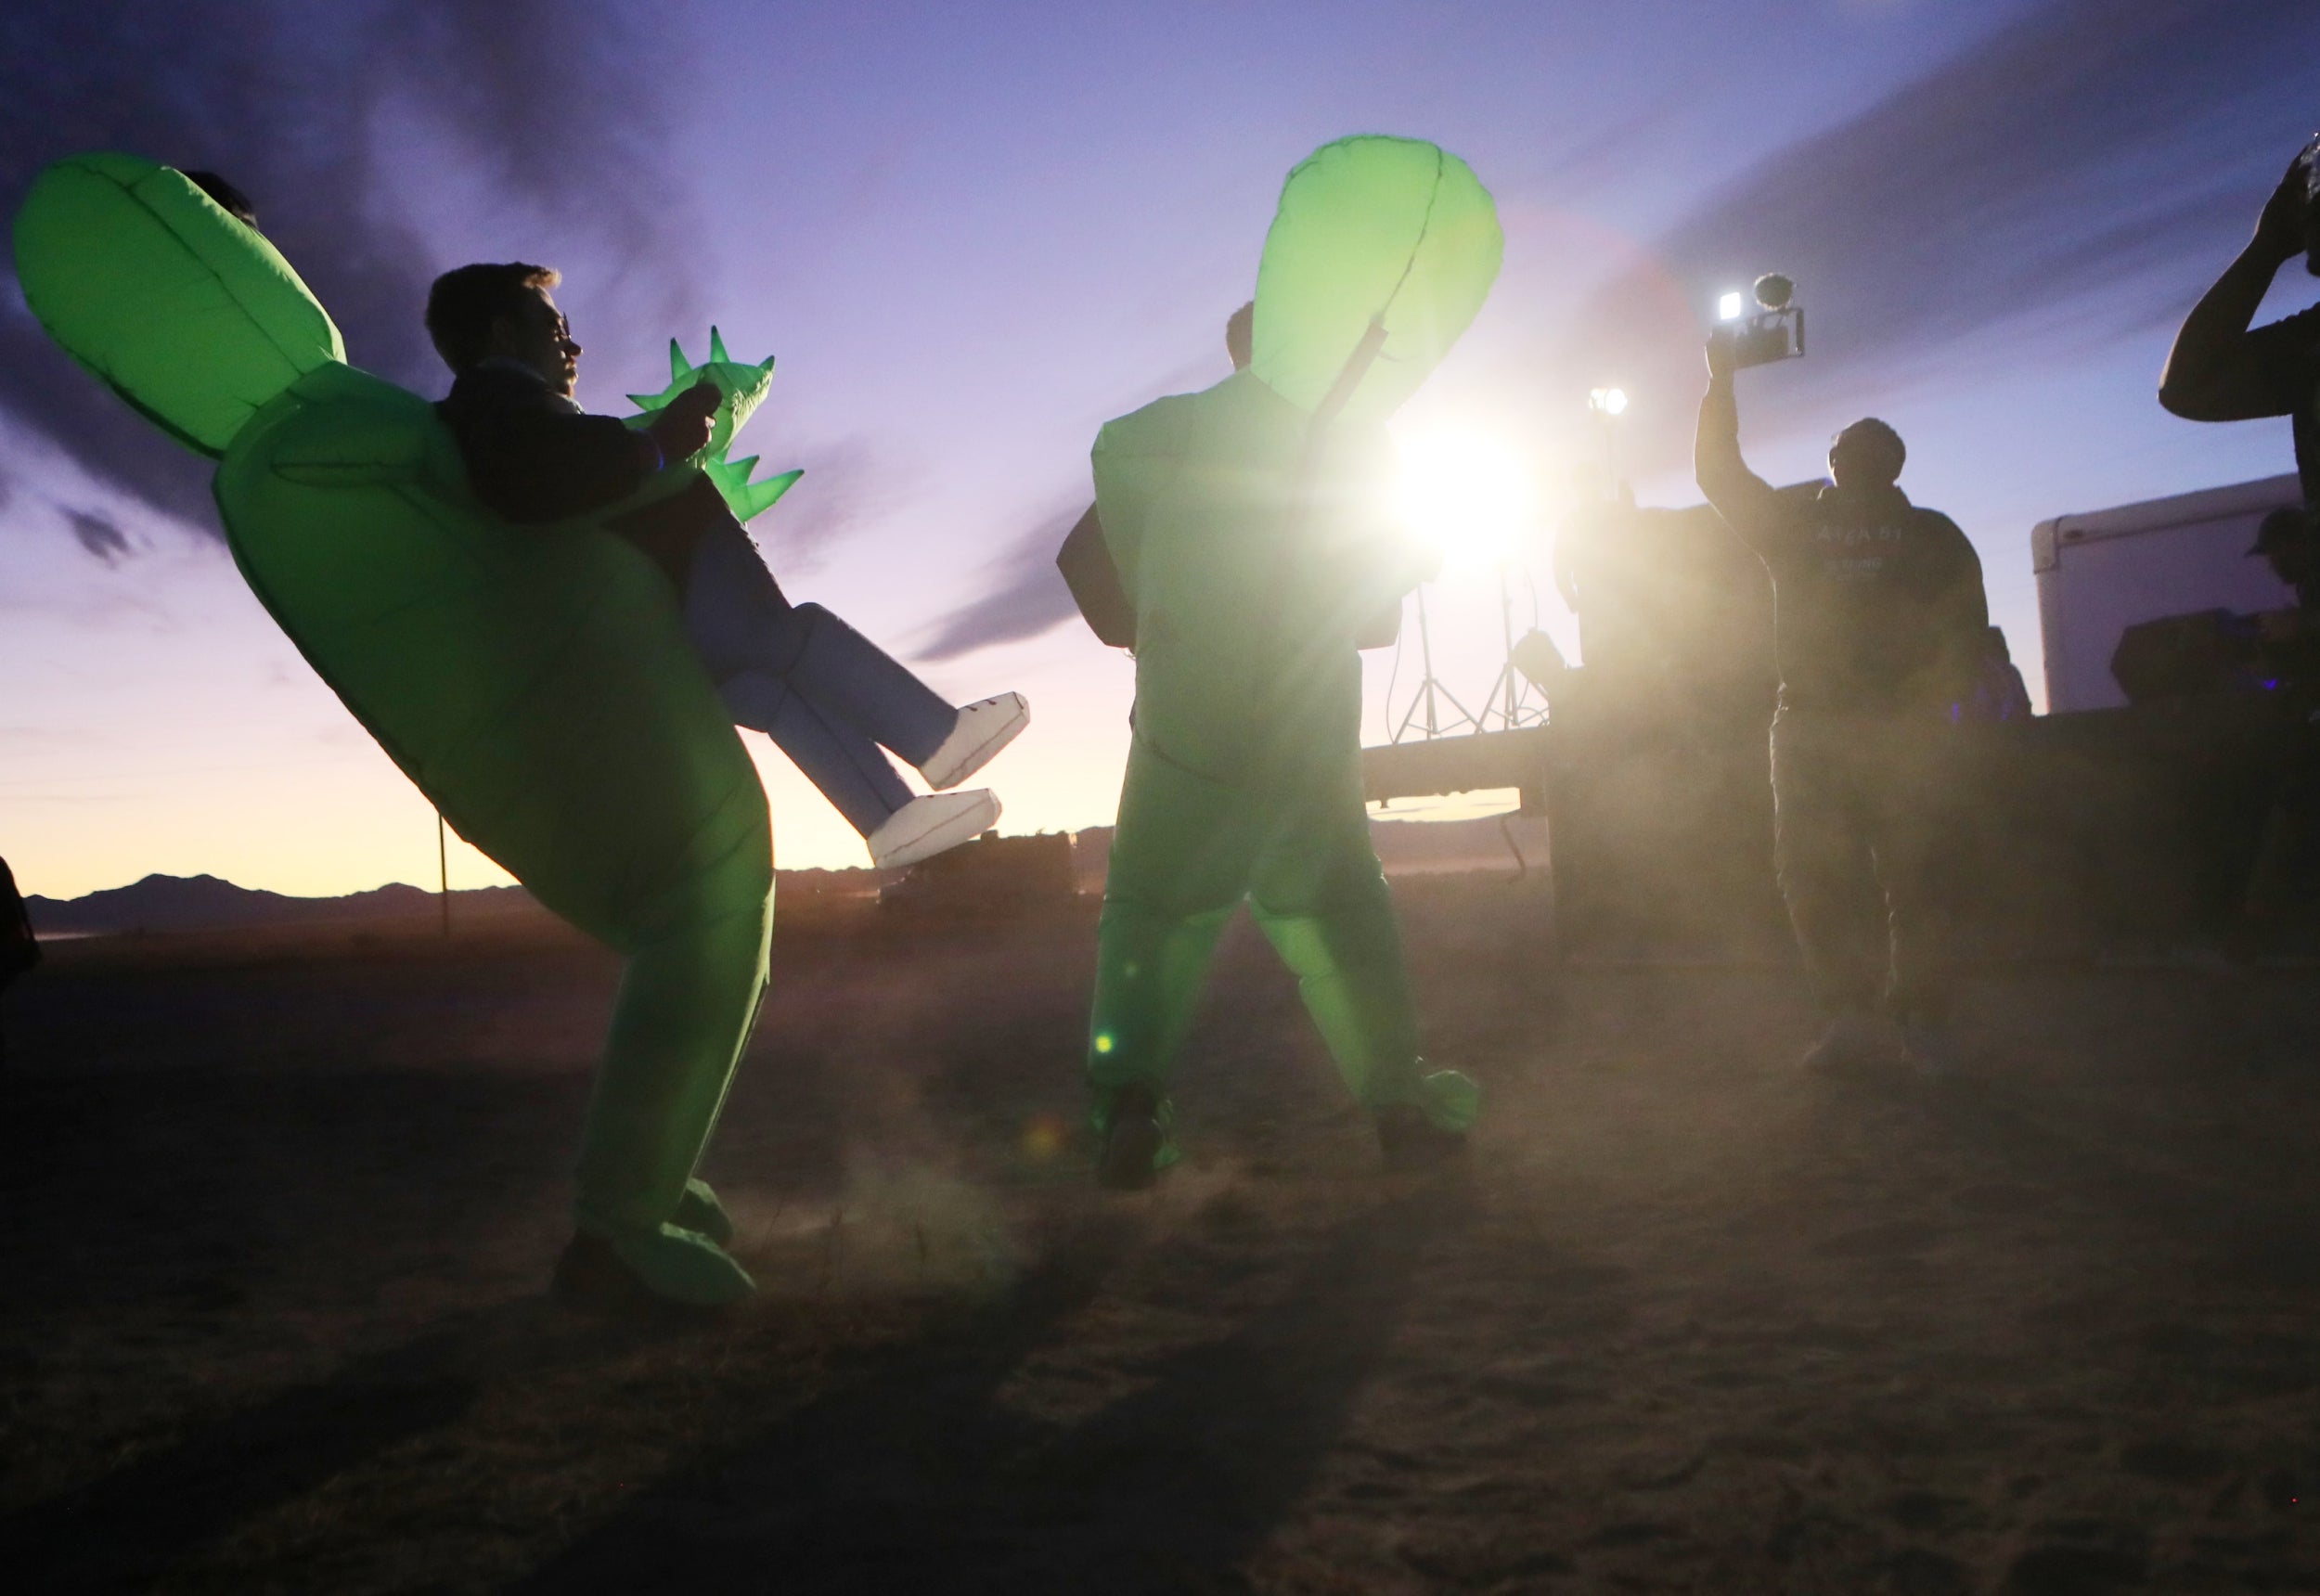 Hundreds gathered in the Nevada desert to 'see them aliens' (Getty Images)